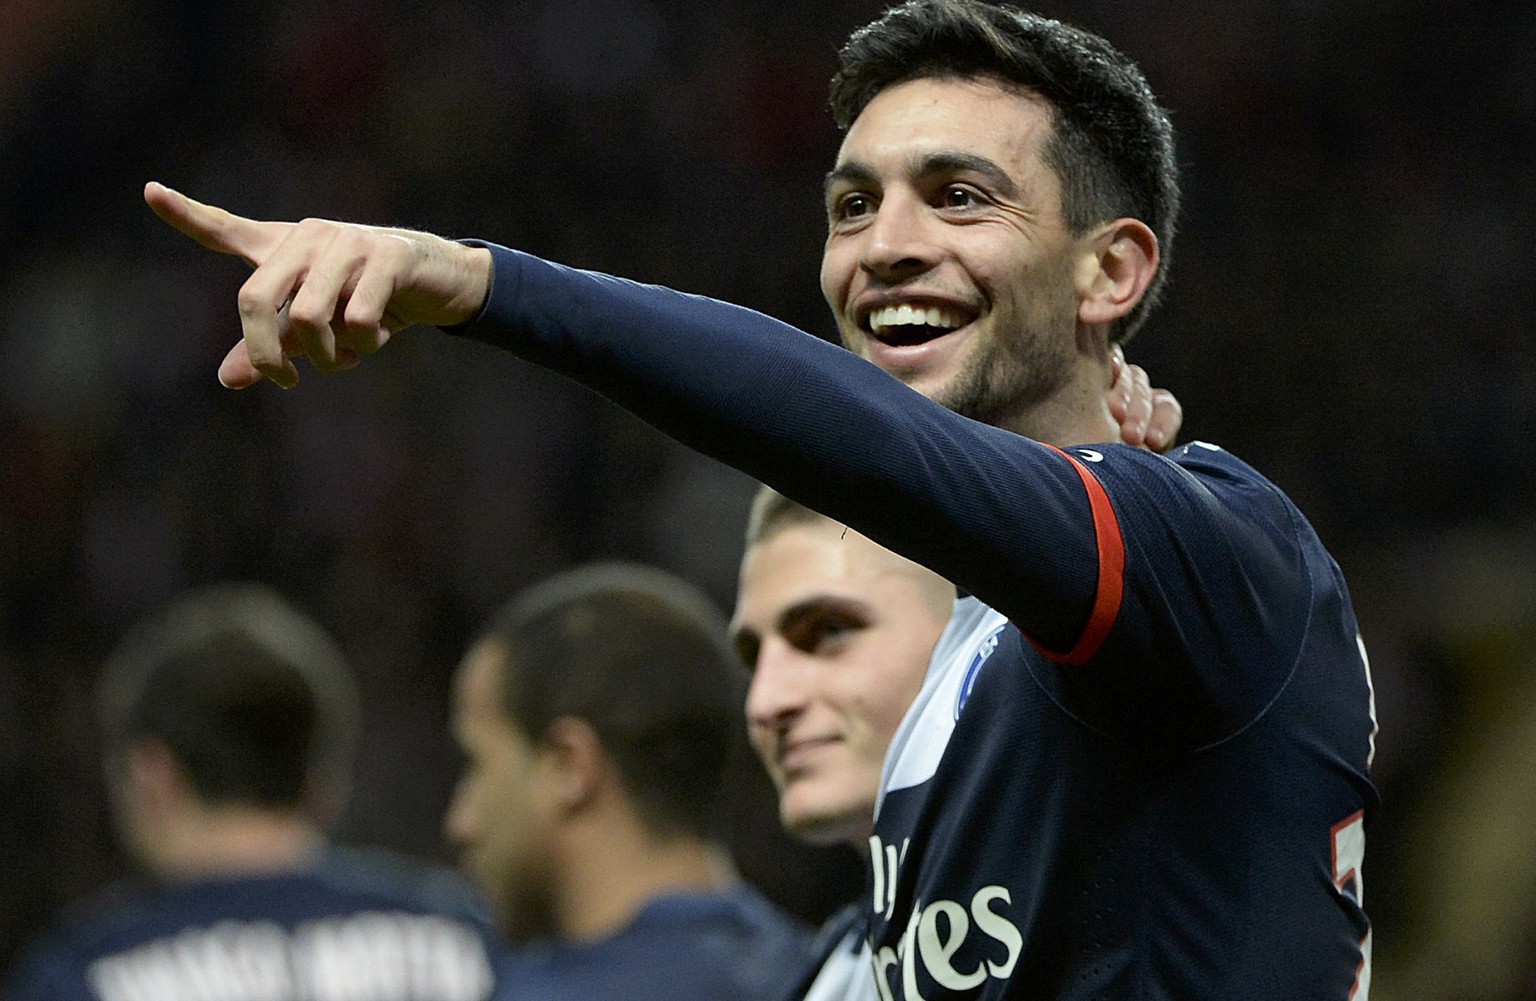 Paris Saint-Germain&#039;s Javier Pastore celebrates after scoring against Monaco during their French Ligue 1 soccer match at the Louis II stadium in Monaco, February 9, 2014. REUTERS/Olivier Anrigo ( ...